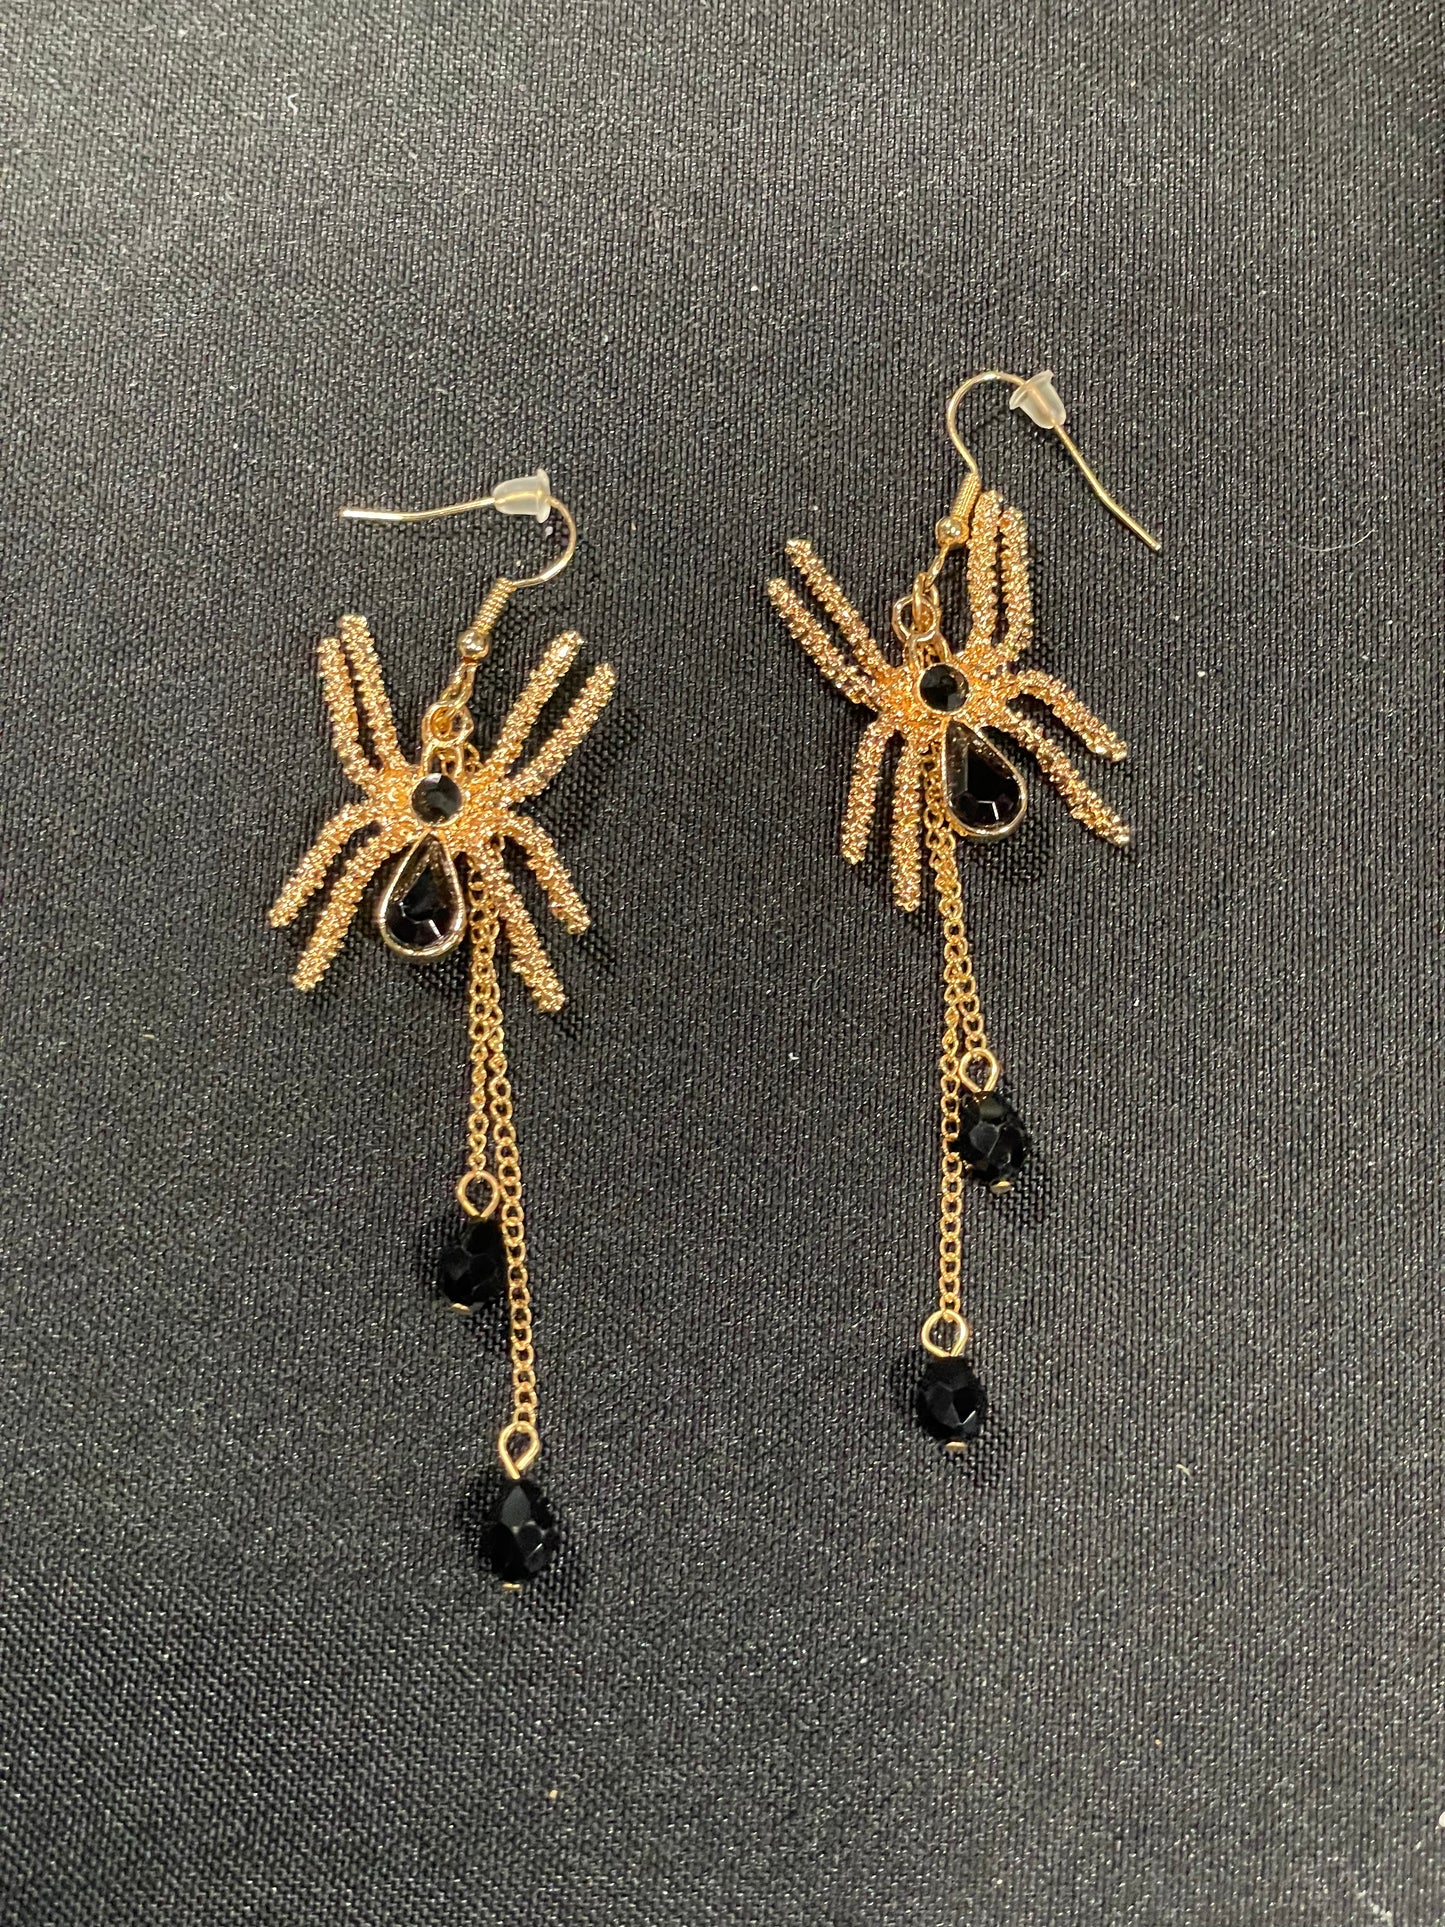 Earring - gold and black spider